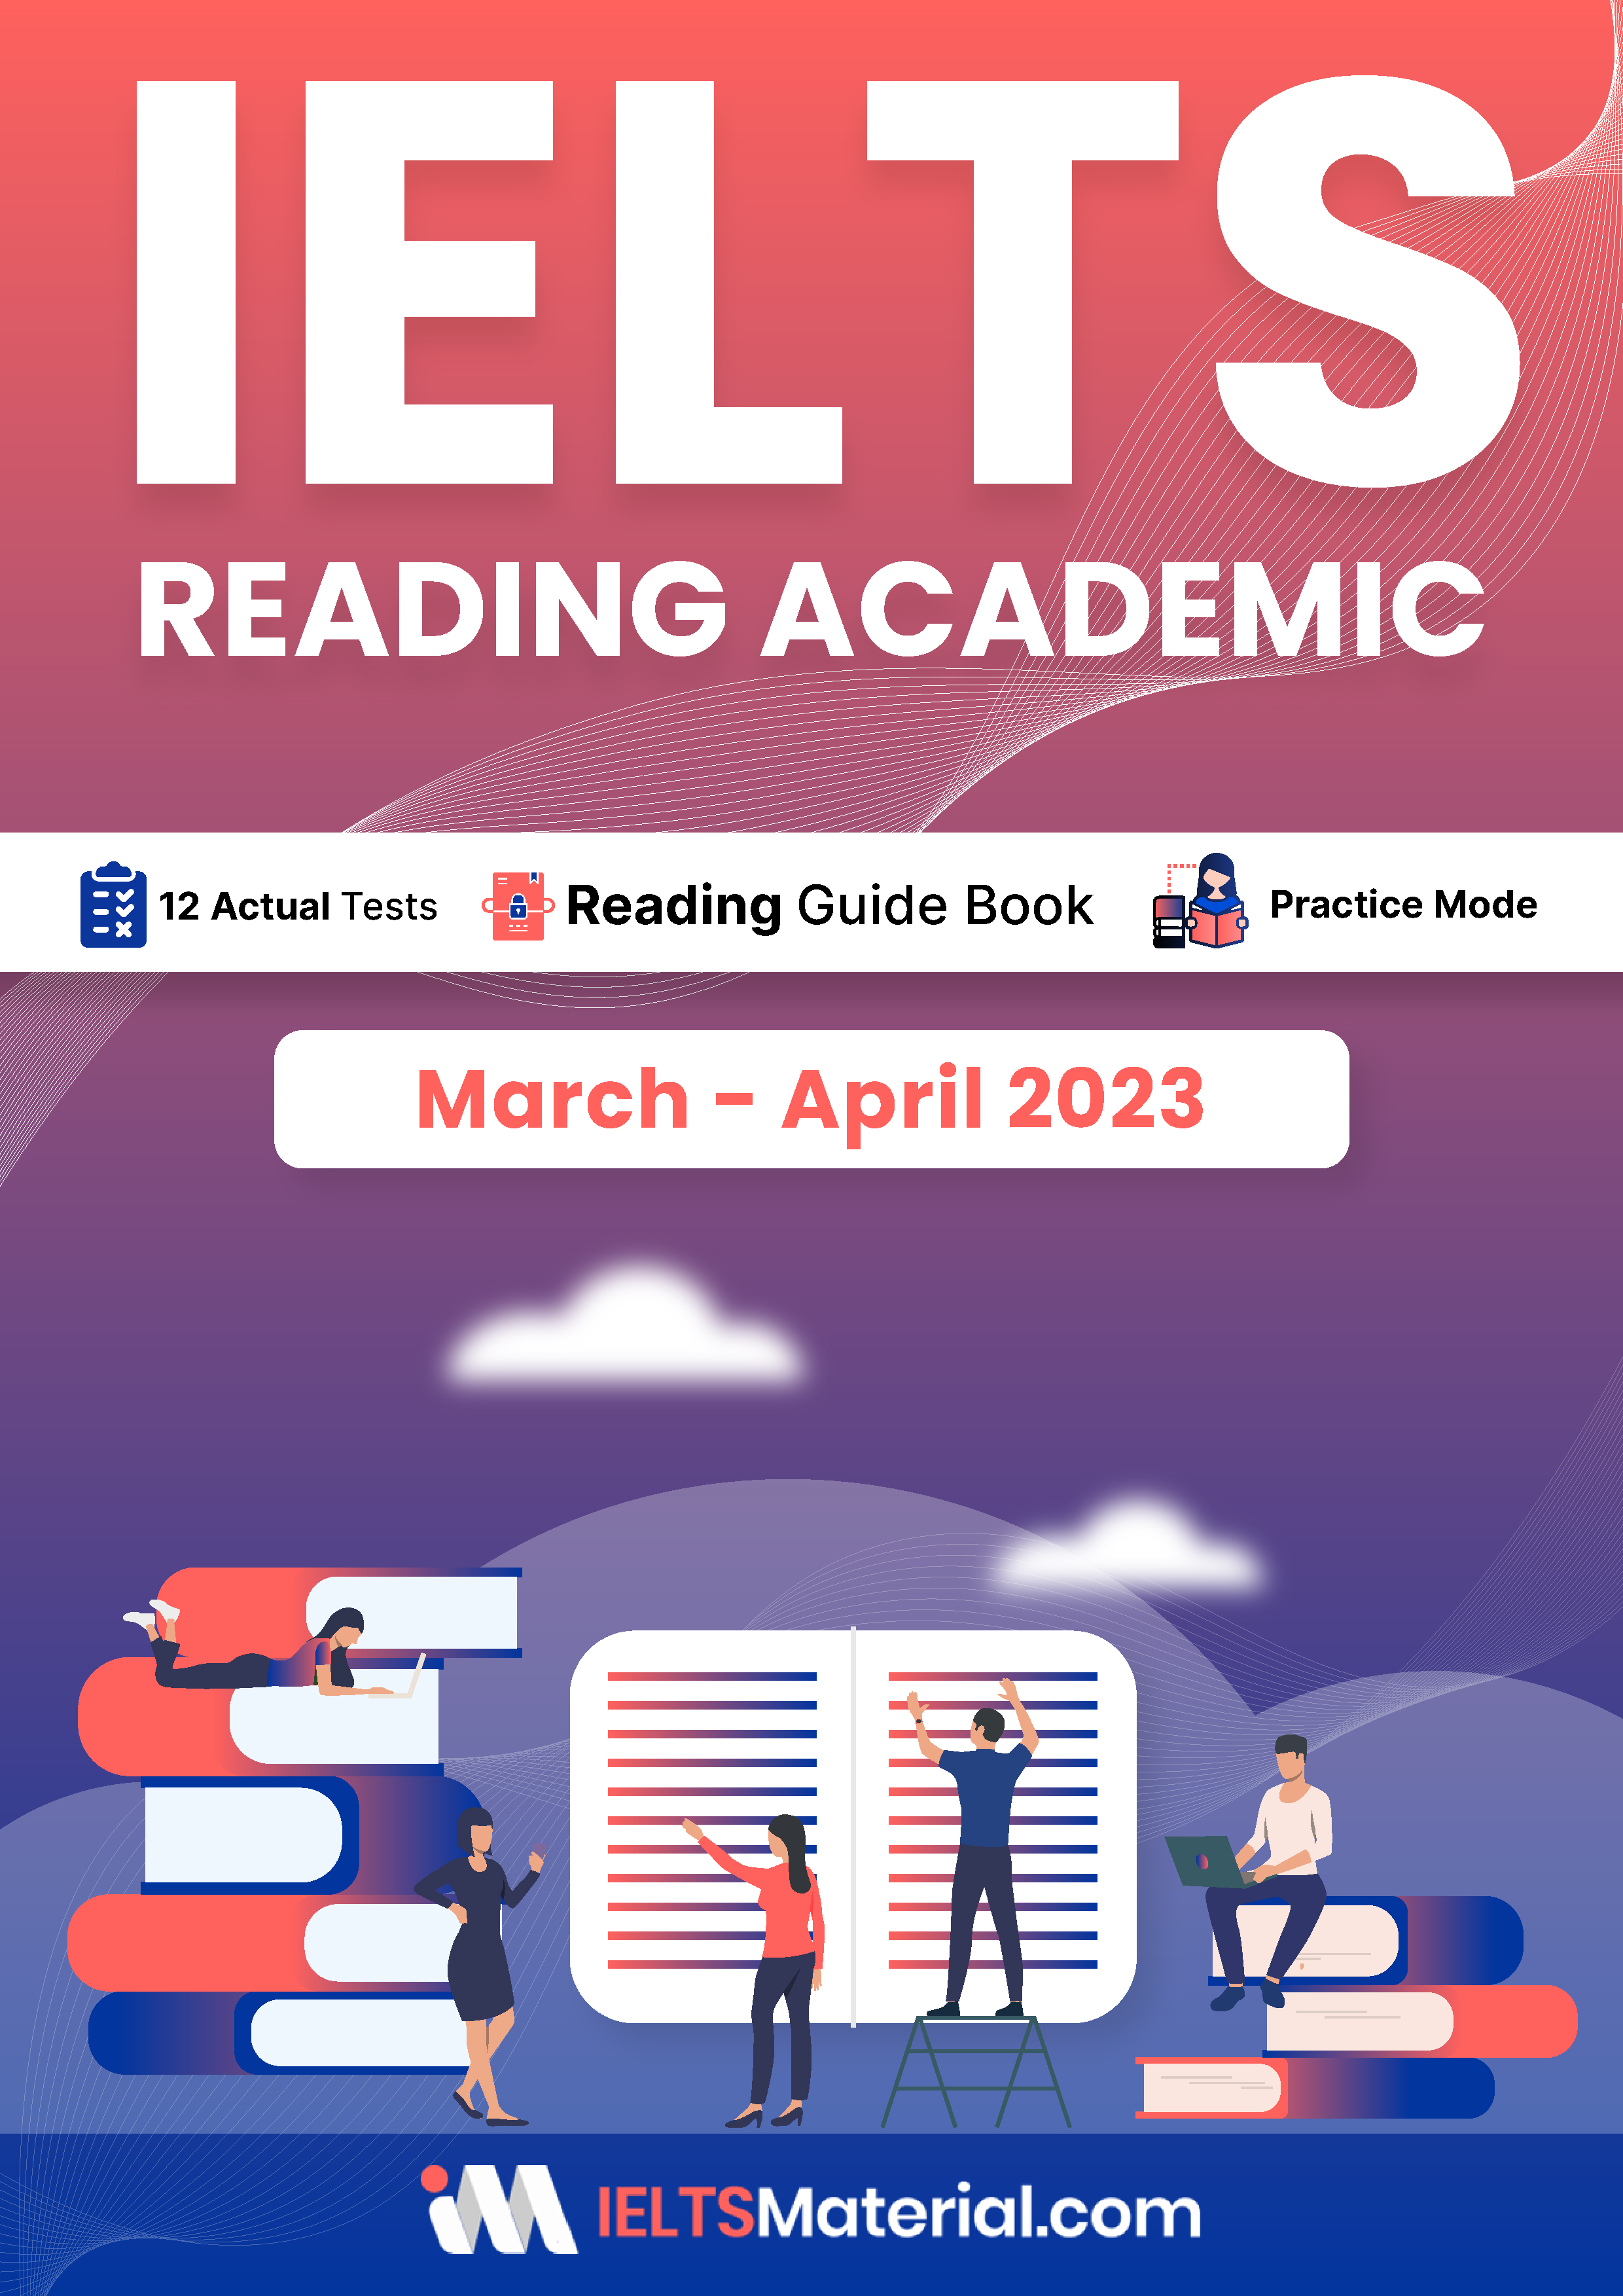 IELTS Reading Academic Test Guide: Essential Tips, Strategies, and Practice Tests” (March-April 2023)